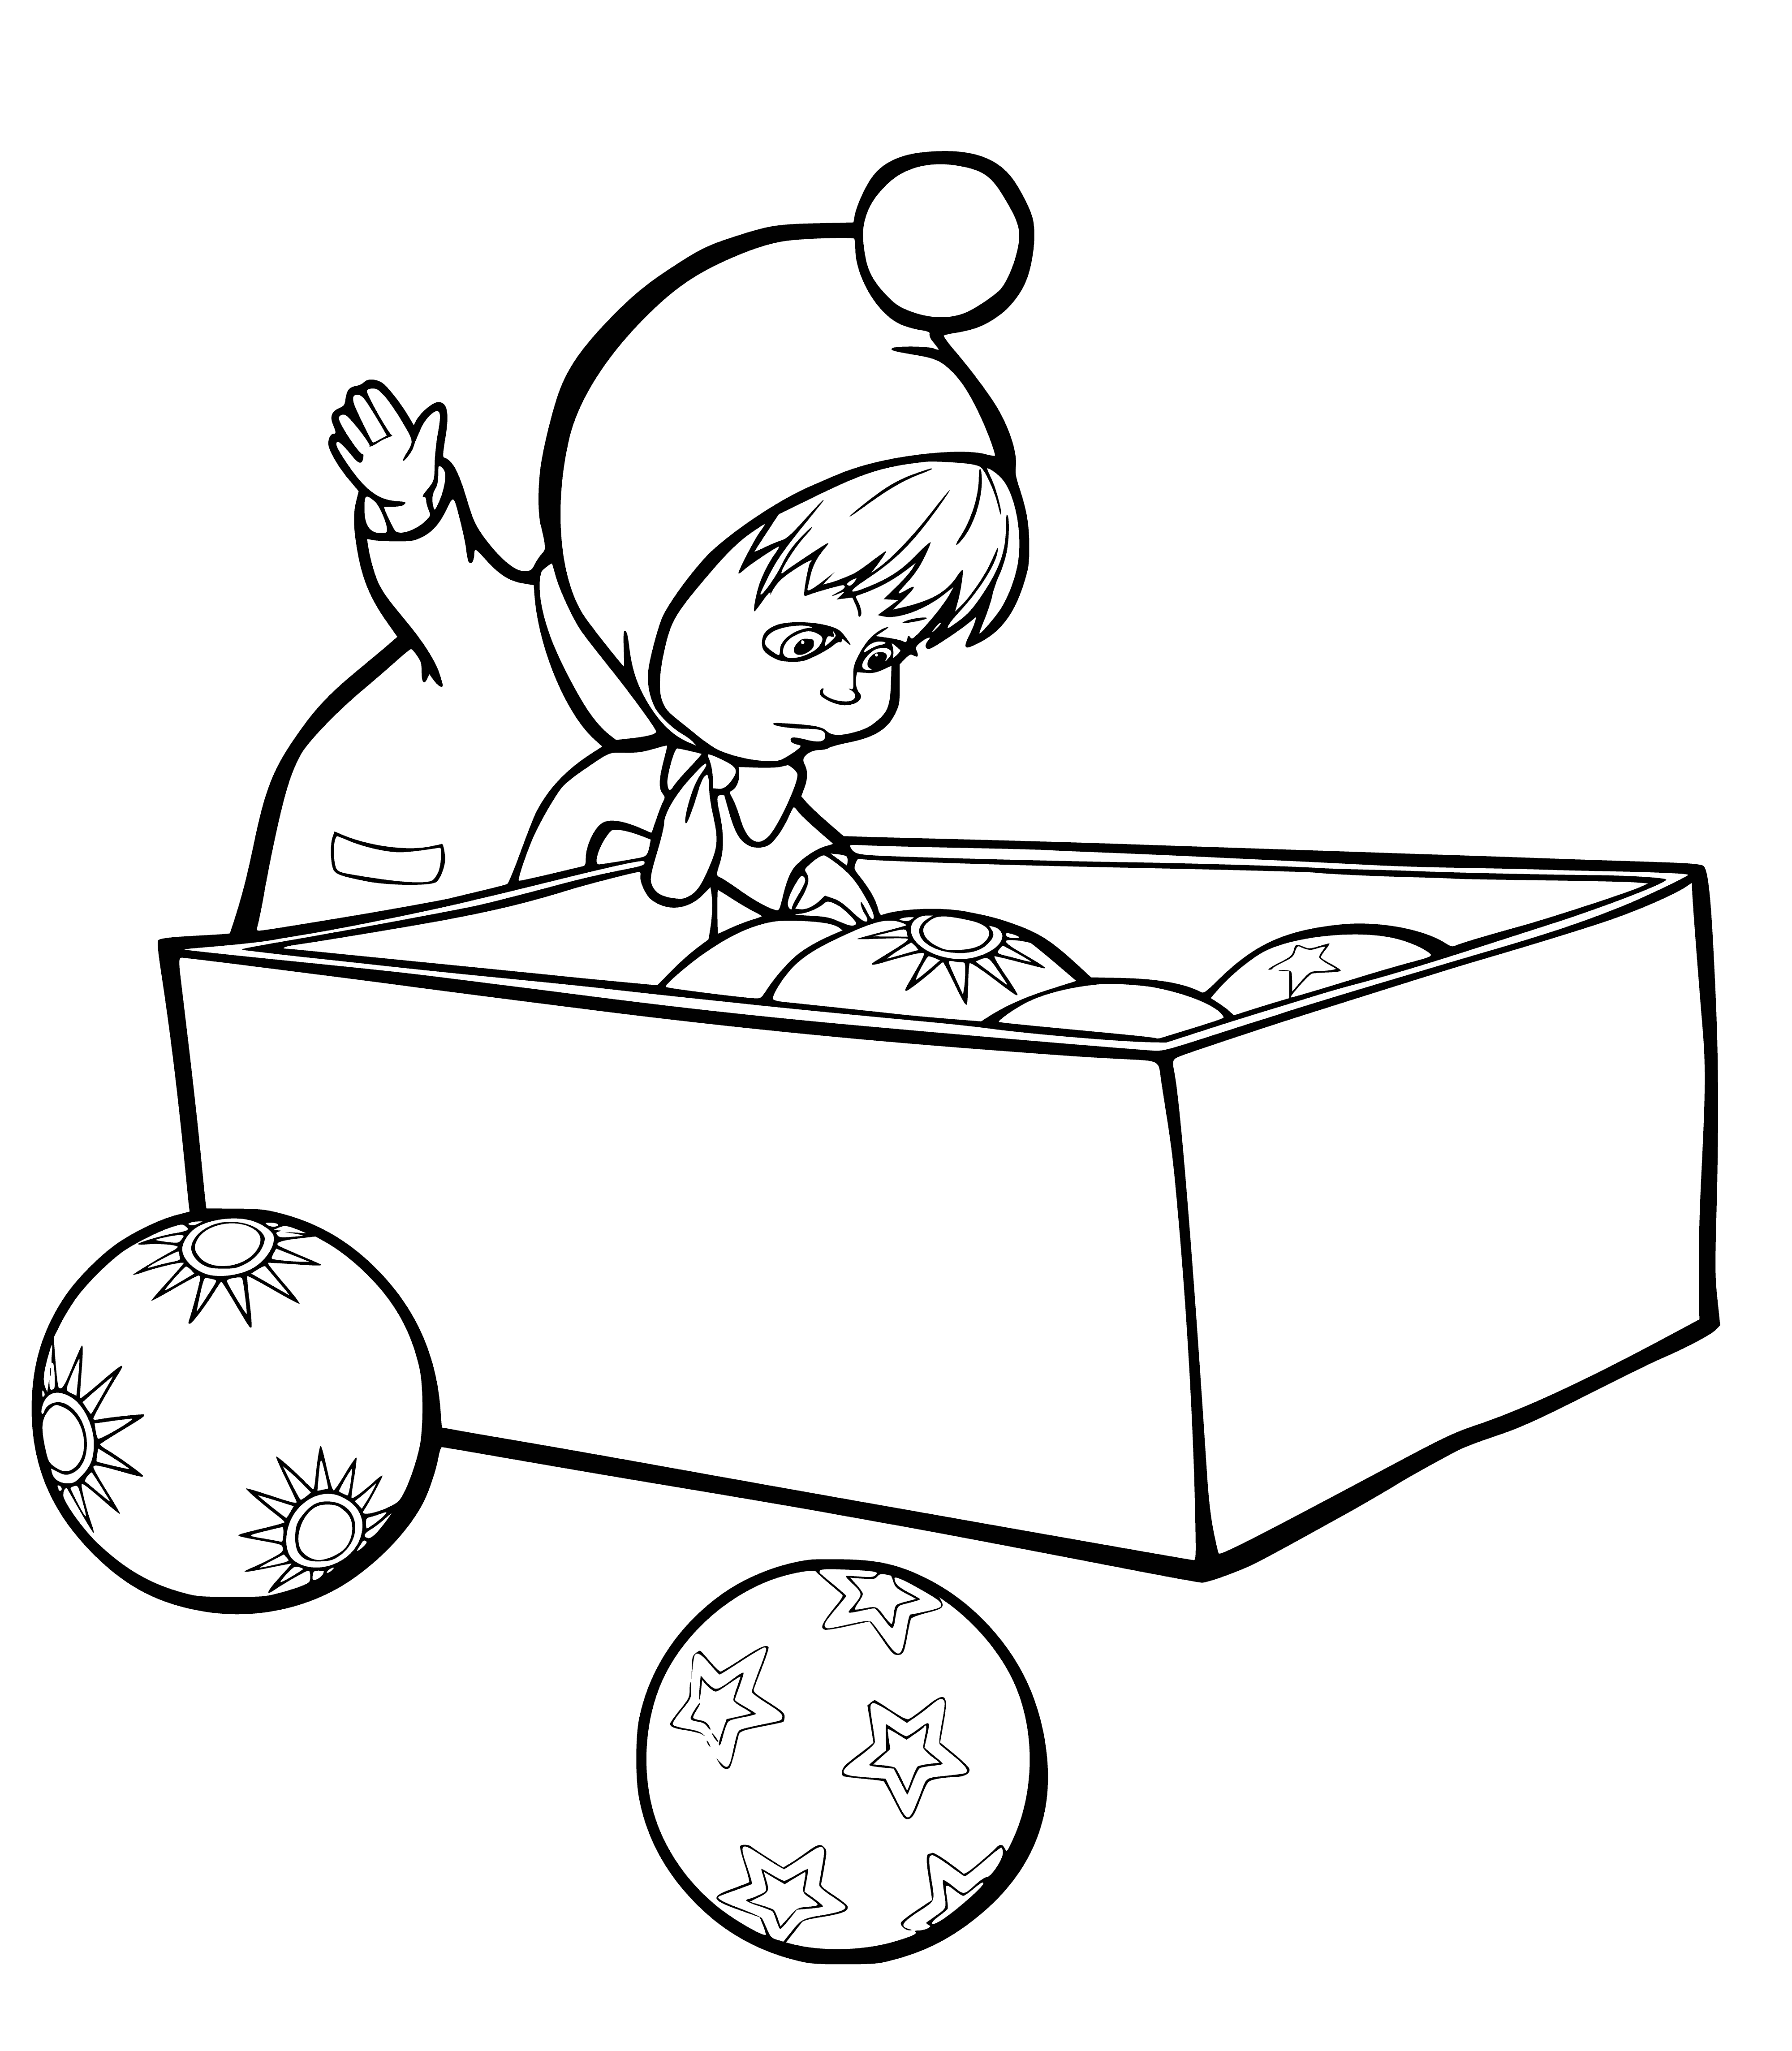 coloring page: Masha juggles 3 balls in a red shirt & blue jeans, w/ blonde pigtails & a large tree & blue sky in the background. #coloringpage